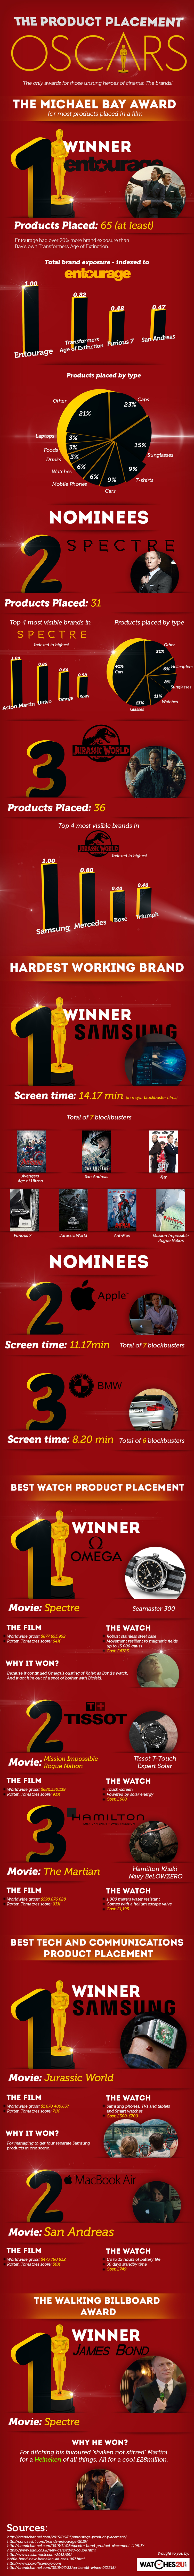 Oscar Awards For Best Product Mentions In Movies